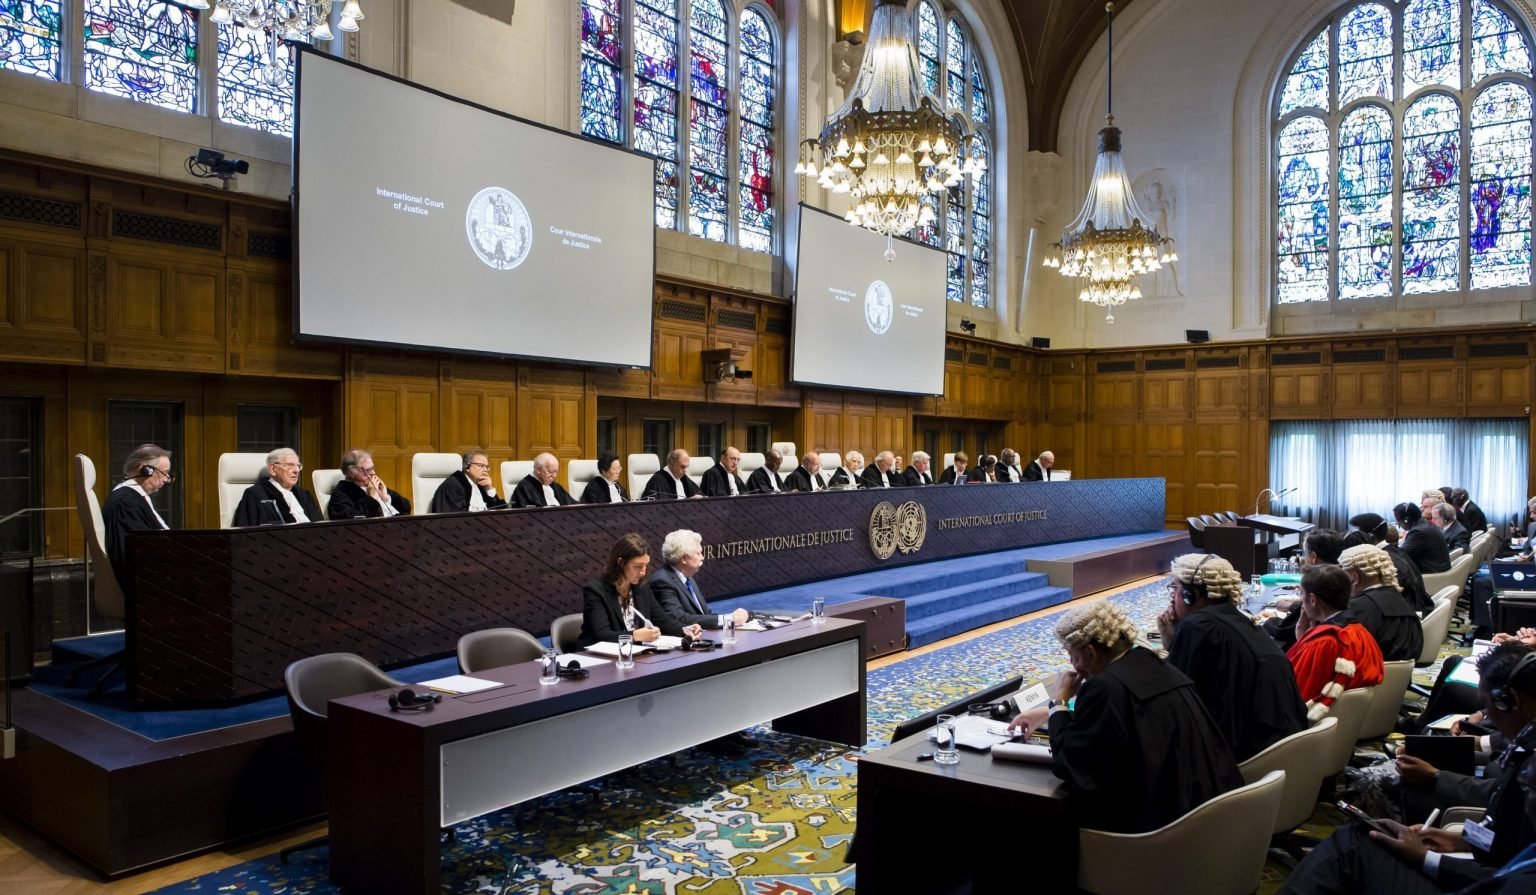 Hearings before the Hague Court